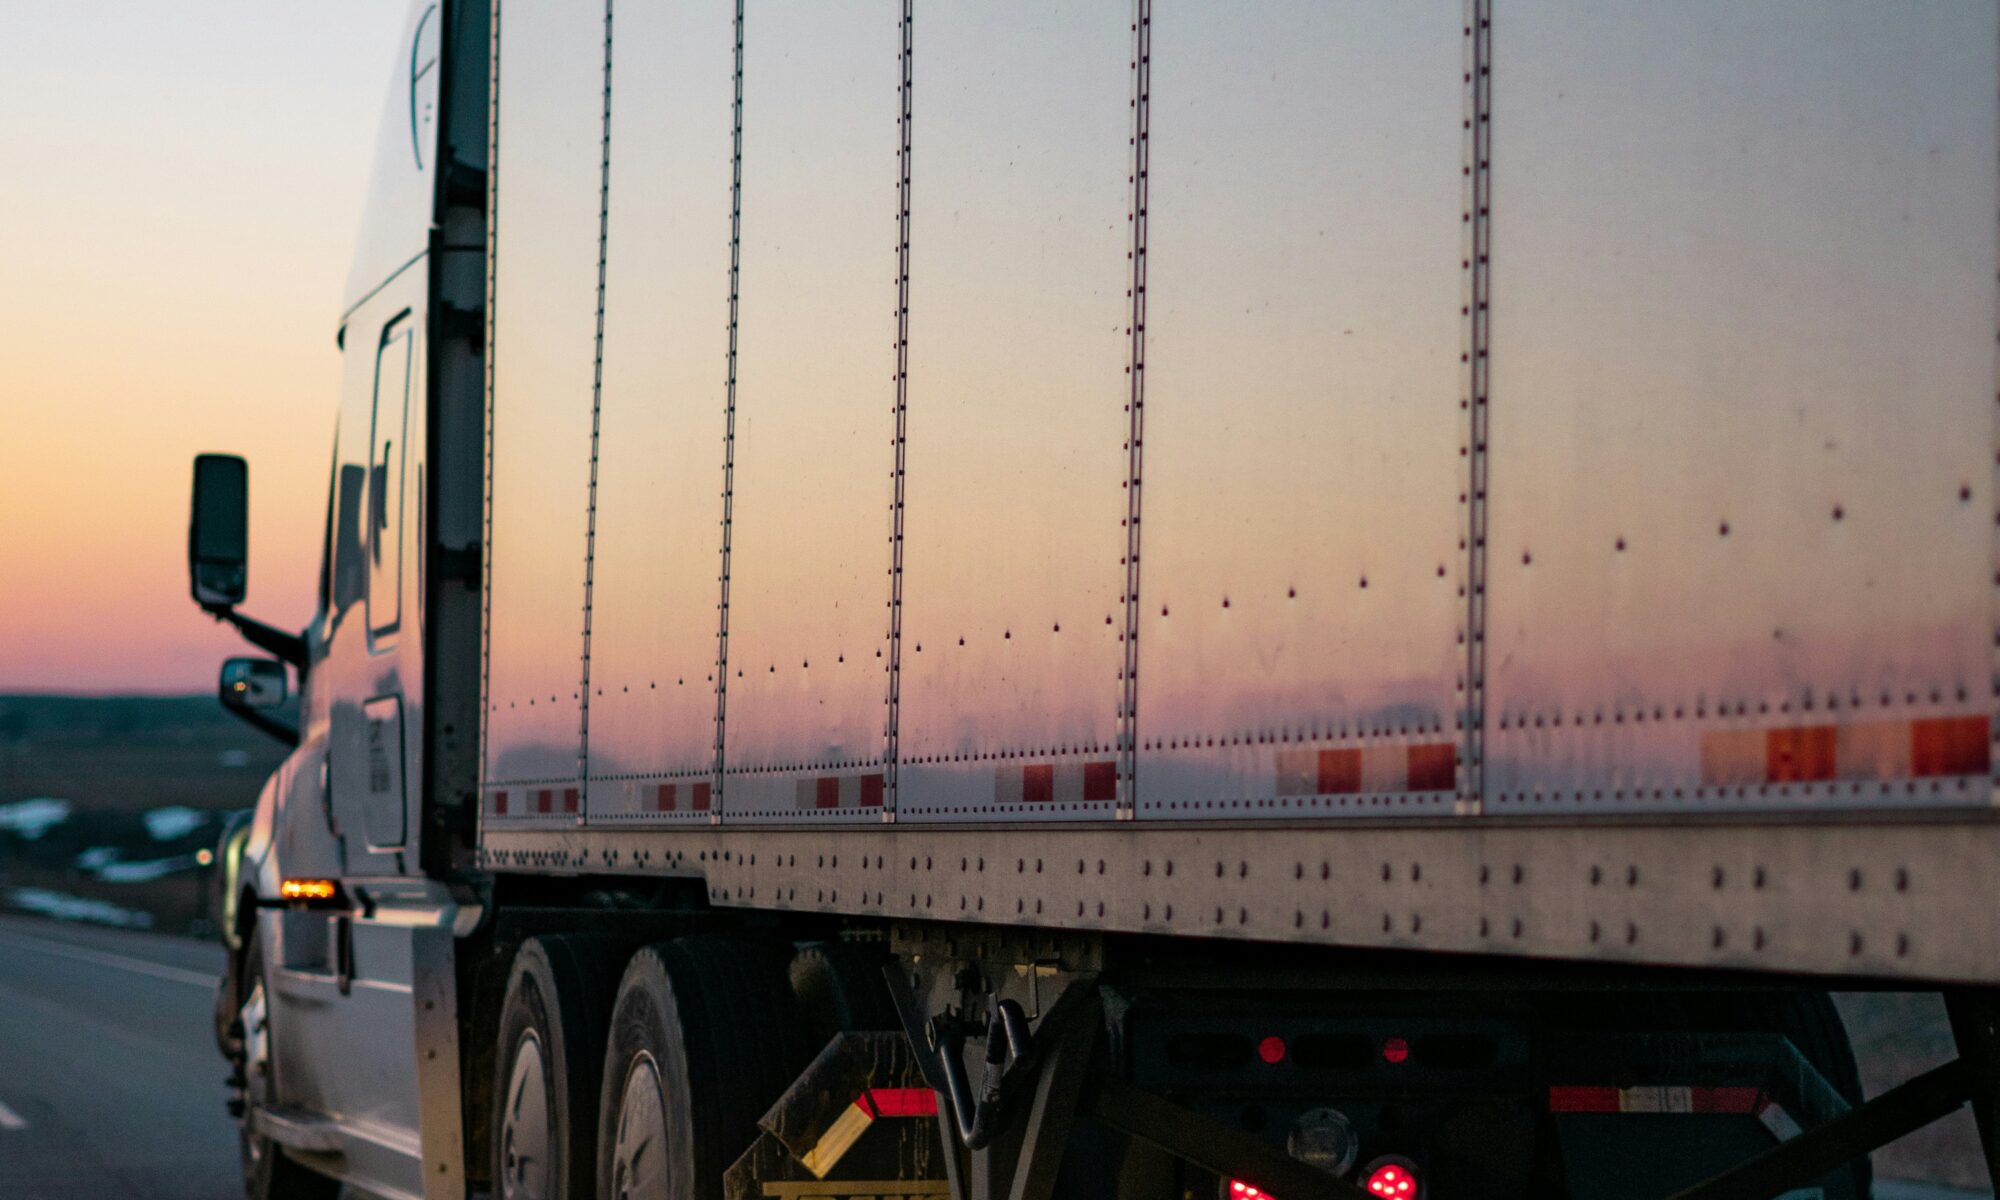 commercial truck driving at sunset